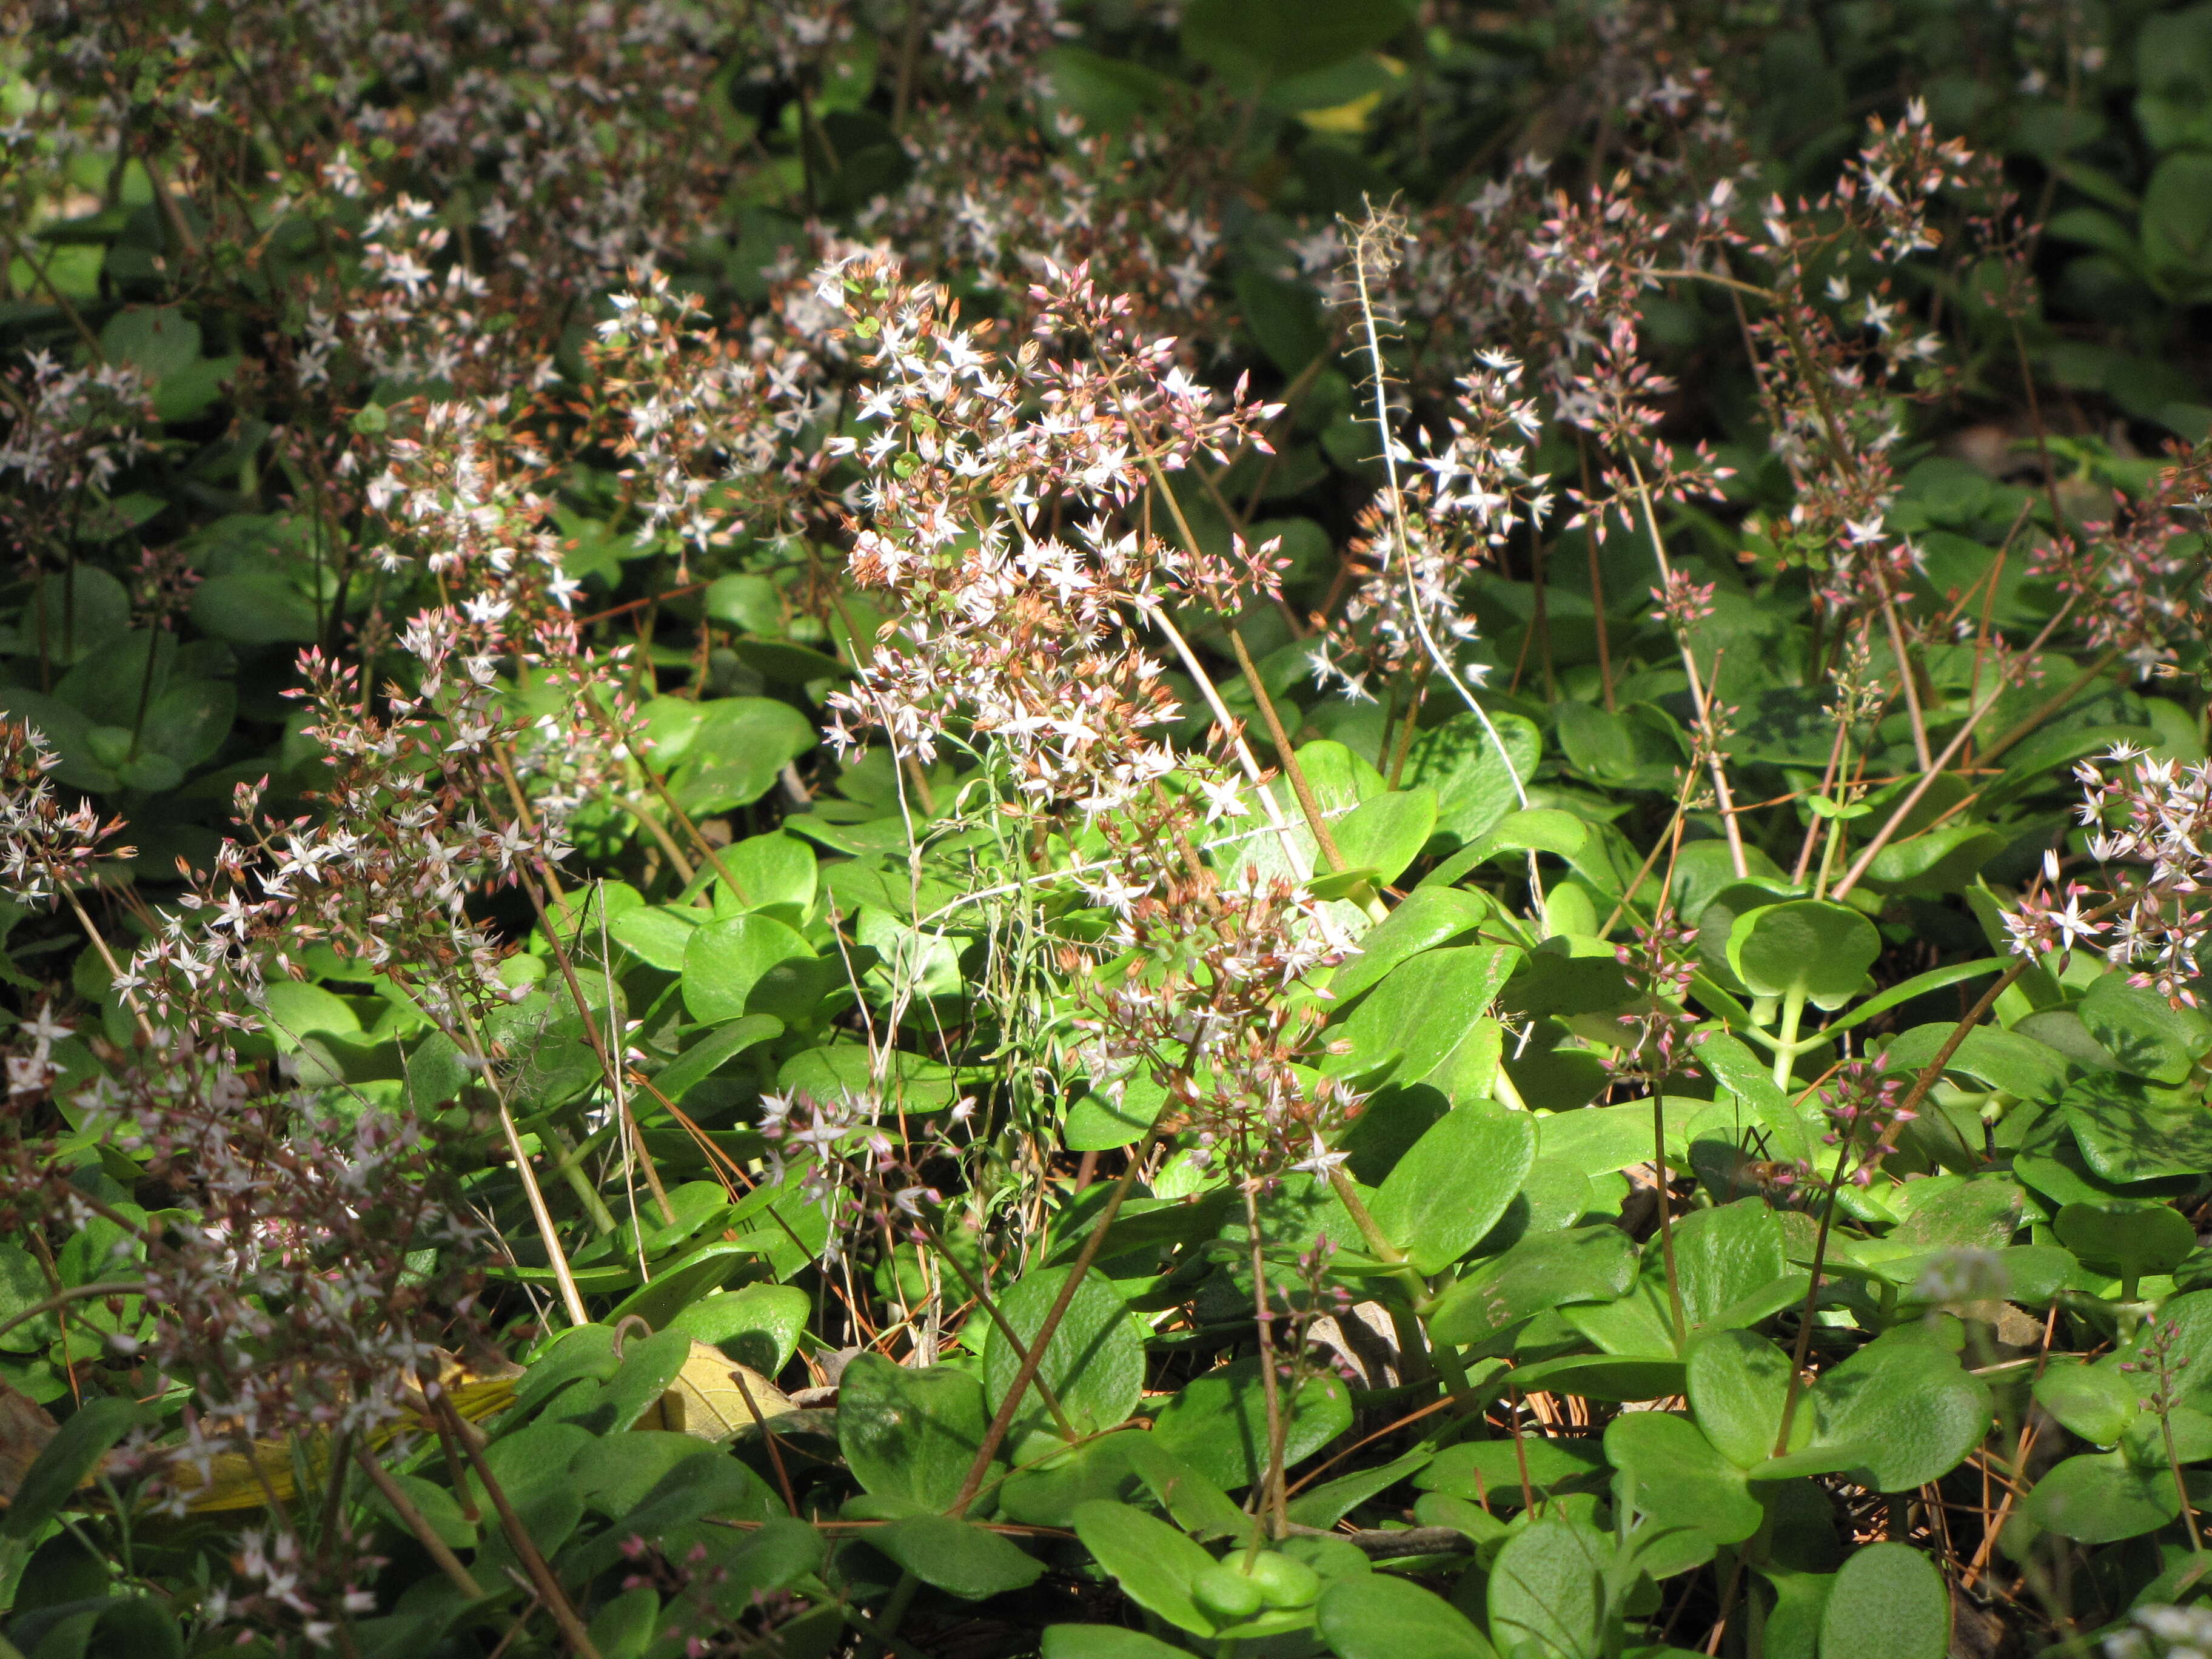 Image of Cape Province pygmyweed